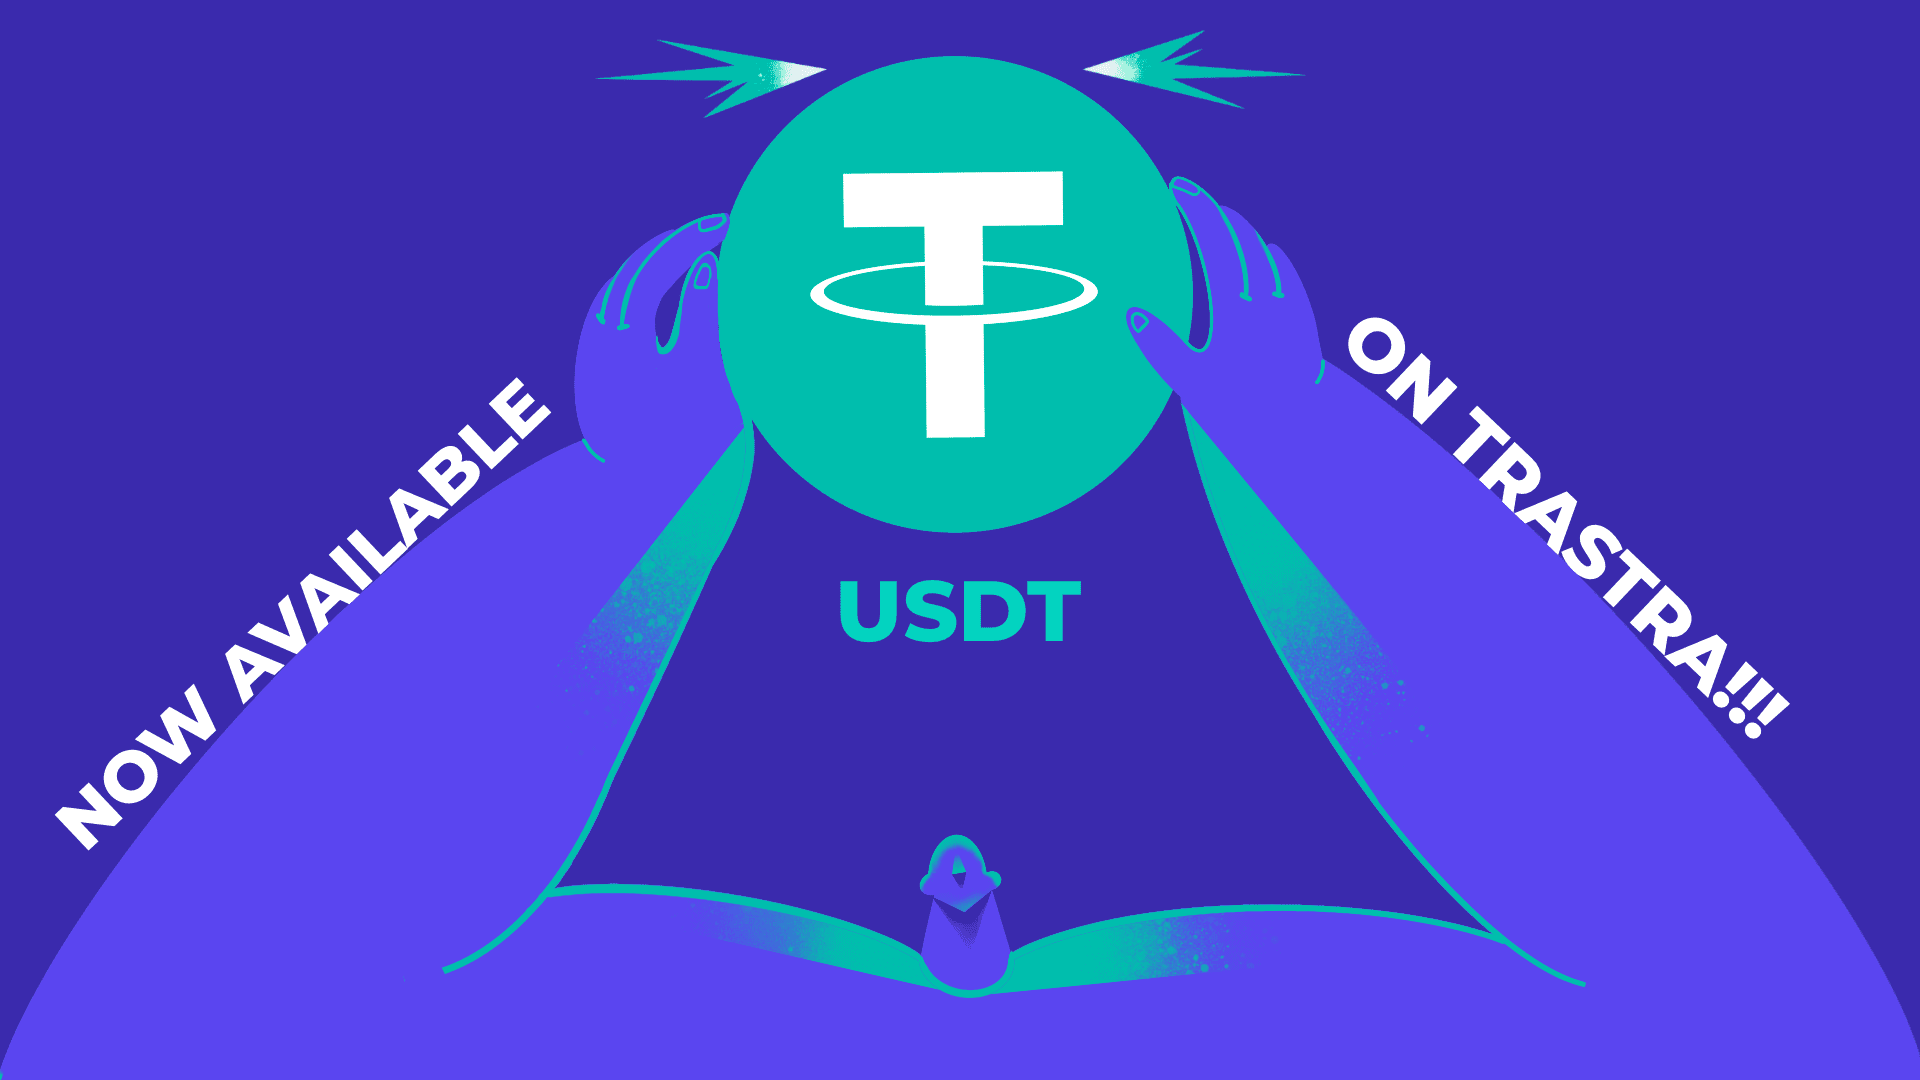 What is USDT TRON?